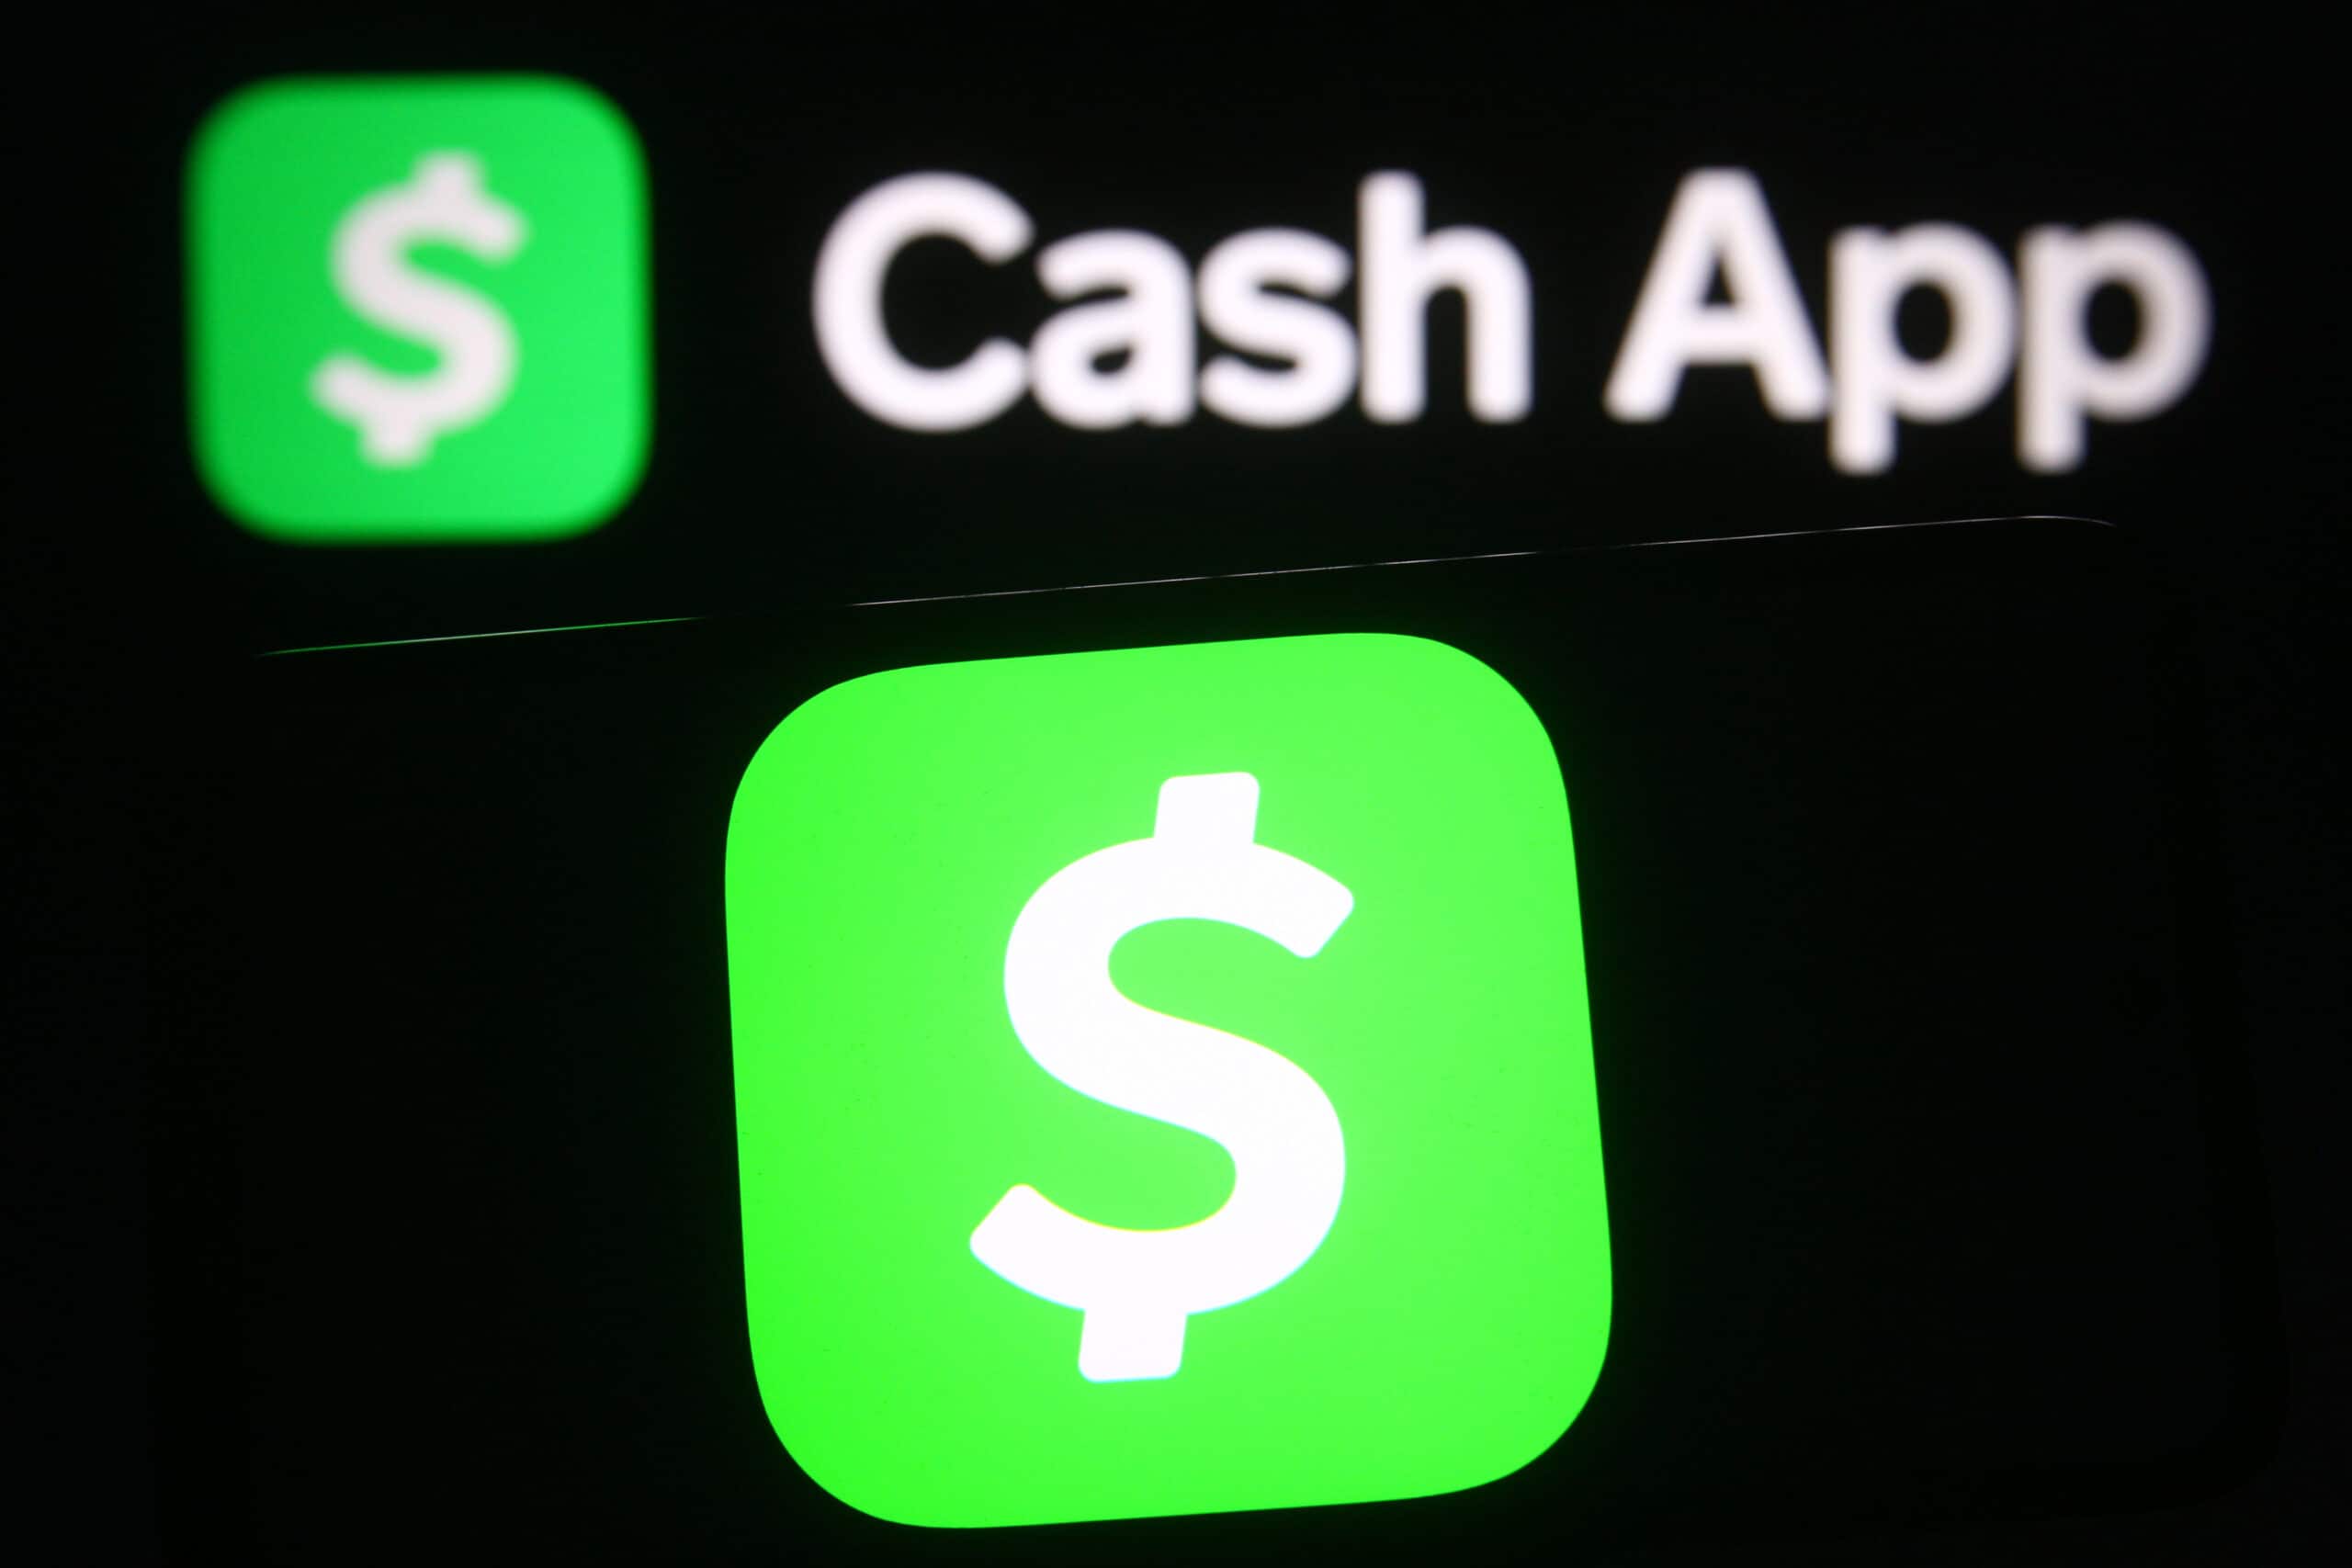 Unlock Your Cash App Account With Cashtag: Easy Steps To Recovery